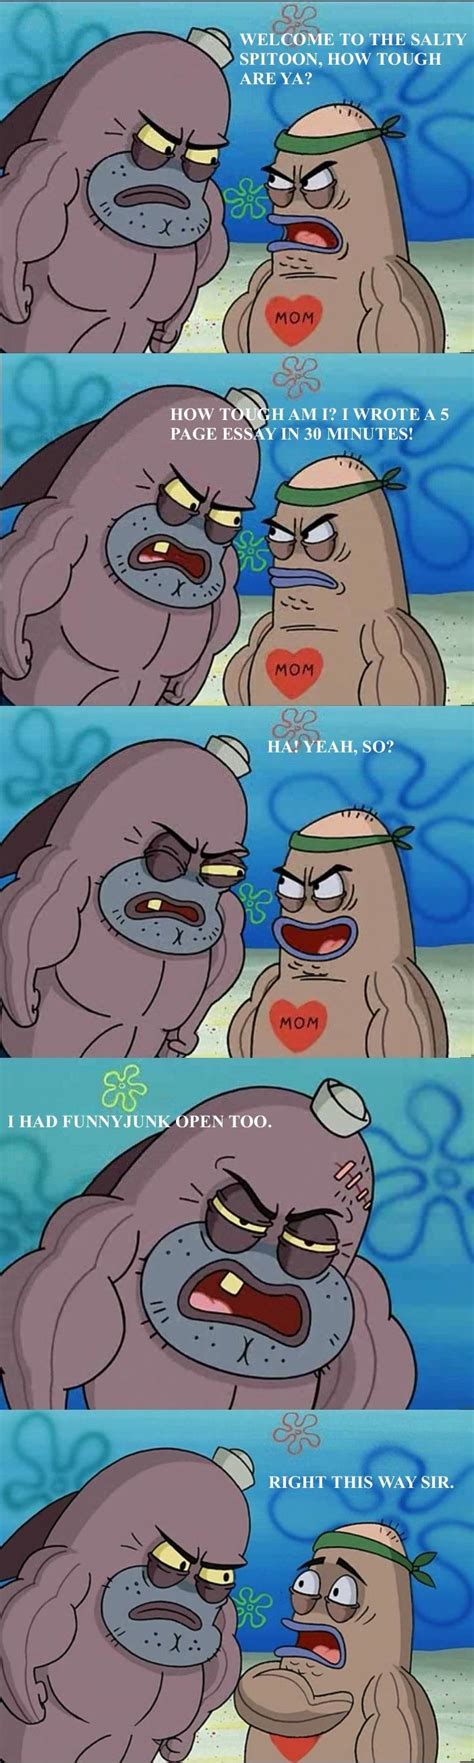 a welcome to the salty spitoon how tough are yai had